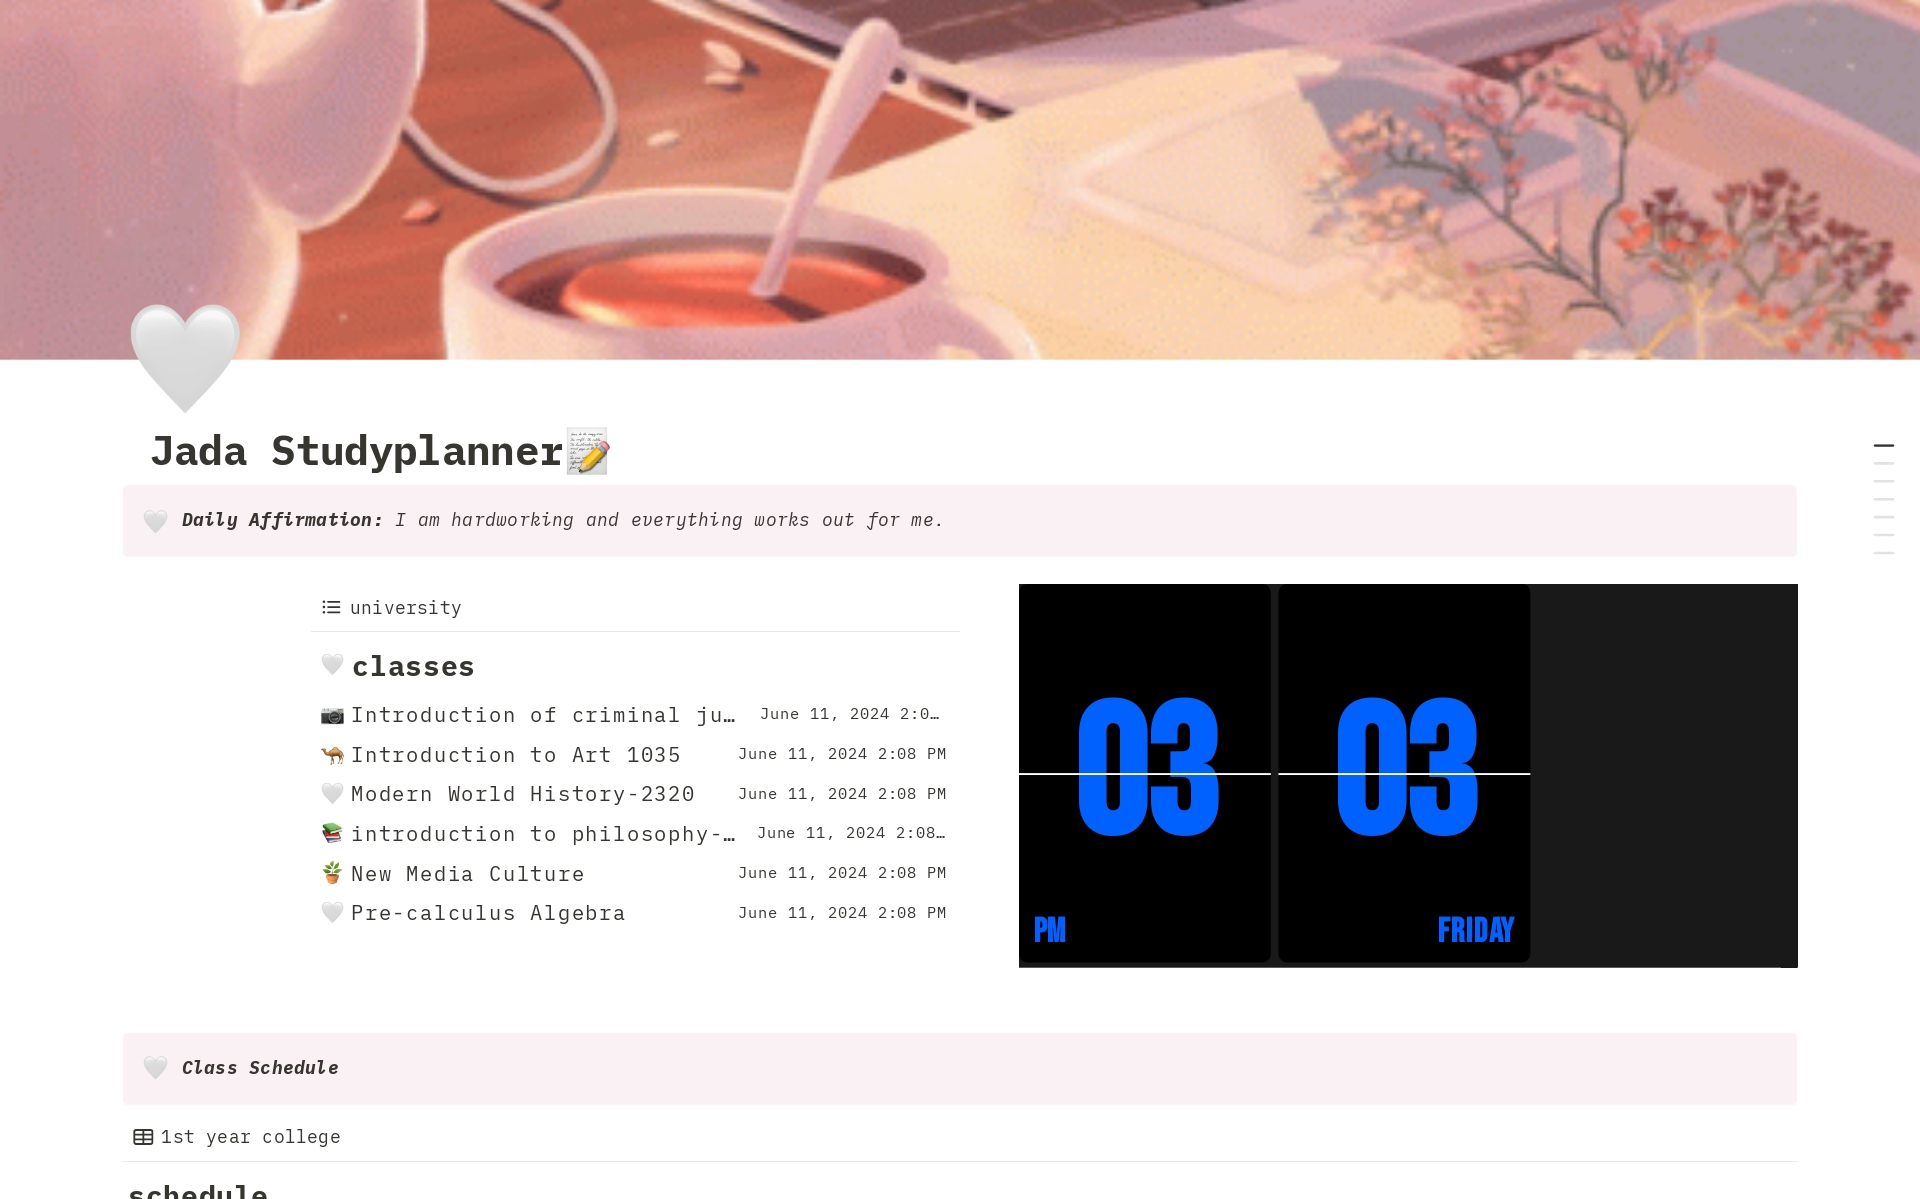 📝 This template is used for School, Work also to plan out all your classes, the time you your classes start and ends.
You can also put links 🔗 so you can go check your work assignments like quiz, homework, essay, emails, exams and more 